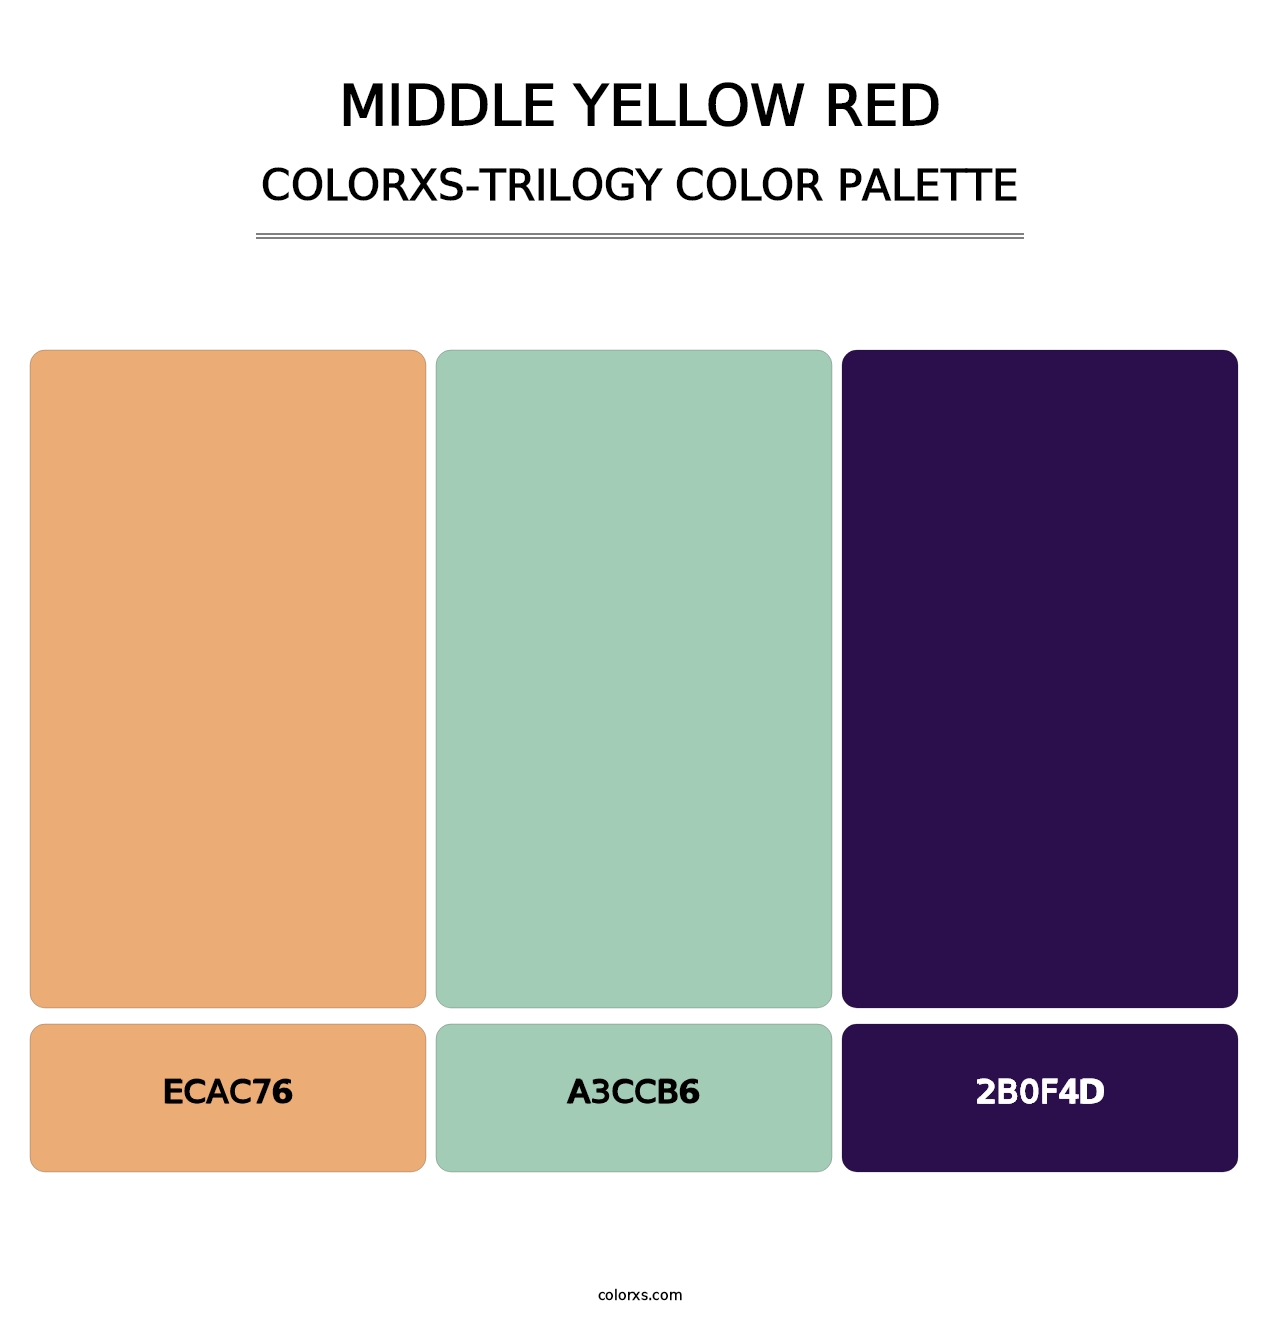 Middle Yellow Red - Colorxs Trilogy Palette